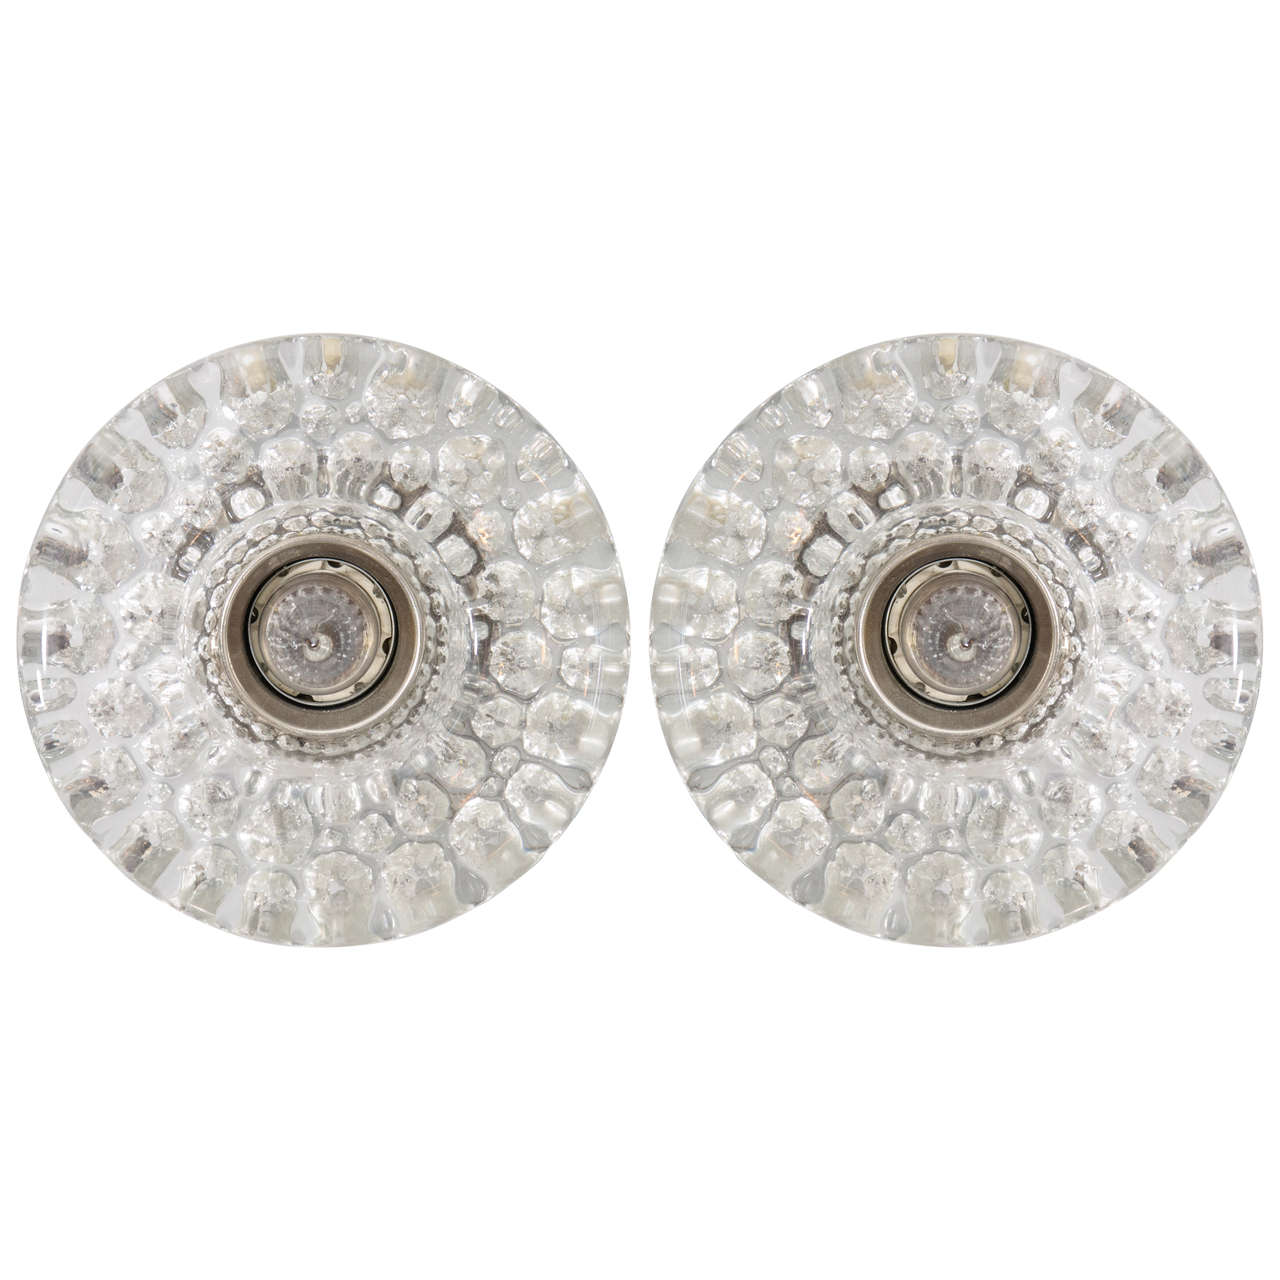 Pair of Round Glass Barovier & Toso Sconces